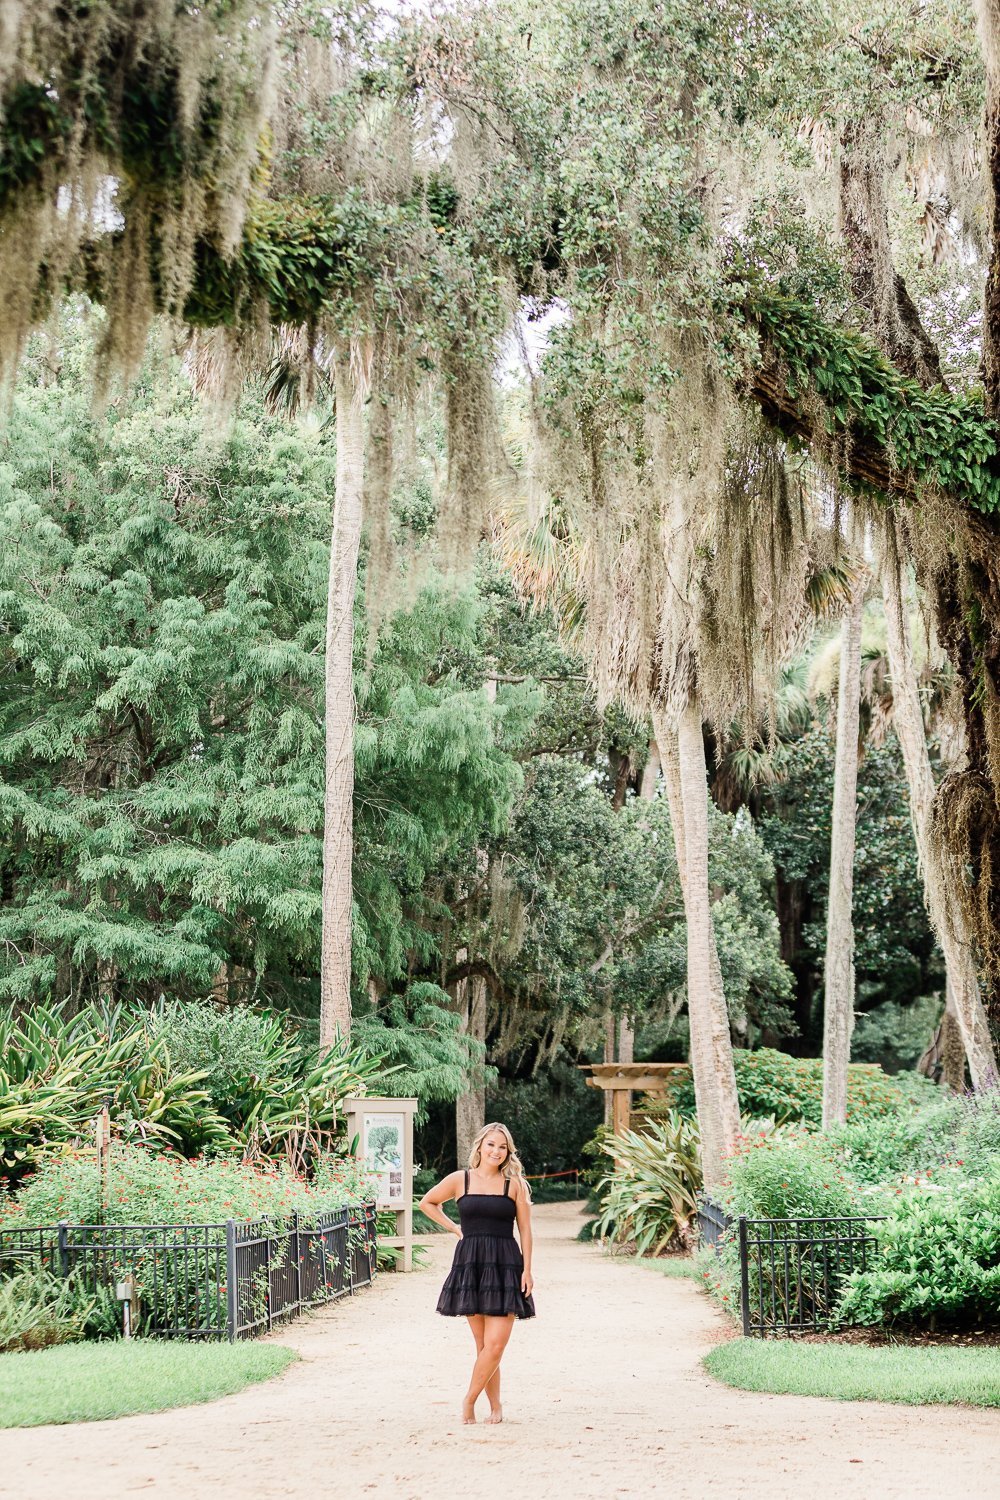 senior pictures under moss trees in Florida gardens